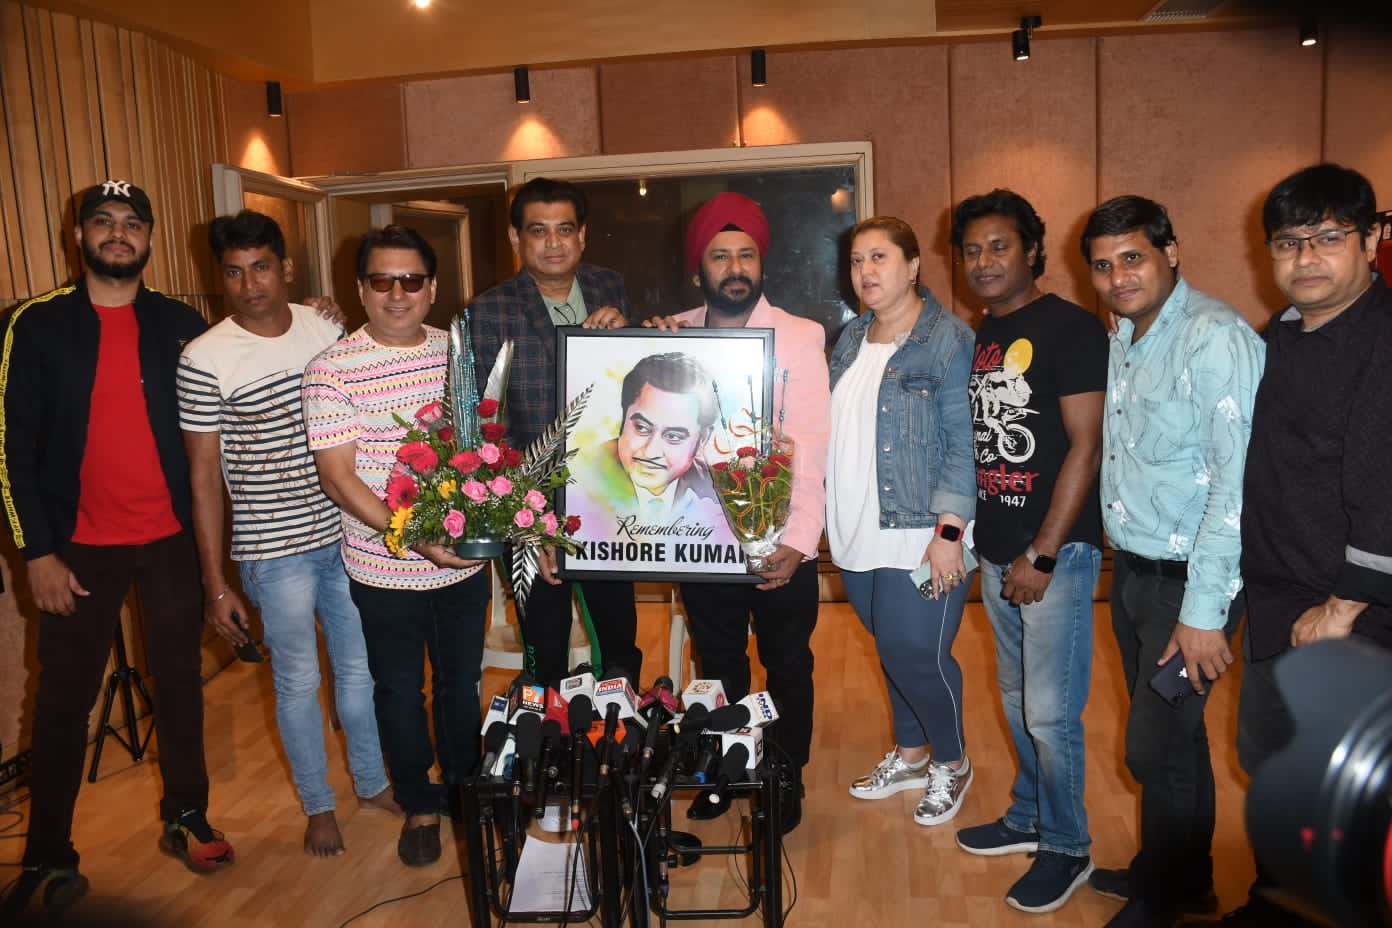 Remembering a musical genius called-  Kishore Kumar! On singer Kishore Kumar’s 93rd birth anniversary, singer Jasveer Singh along with Amit Kumar Ganguly, son of Kishore Kumar paid a musical tribute to the legend via a song titled “KISHORE”